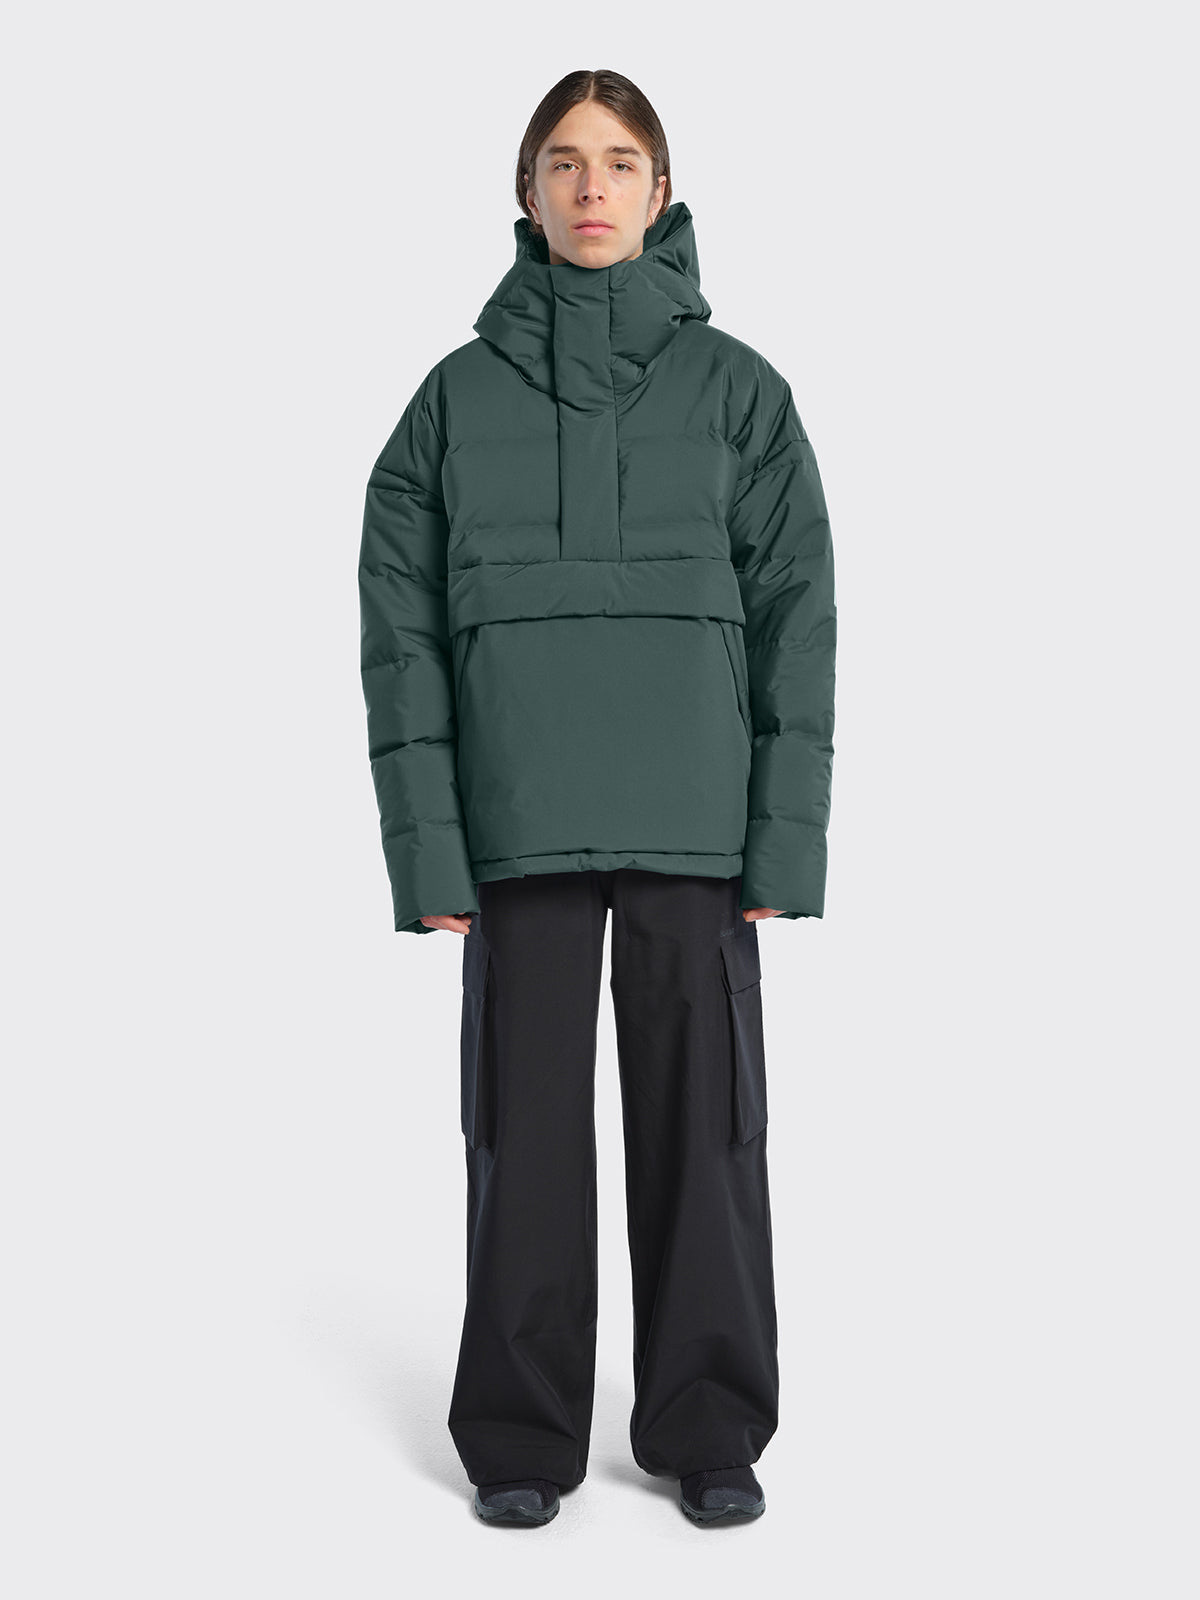 Man wearing Juvet anorak from Blæst in the color Green Gables